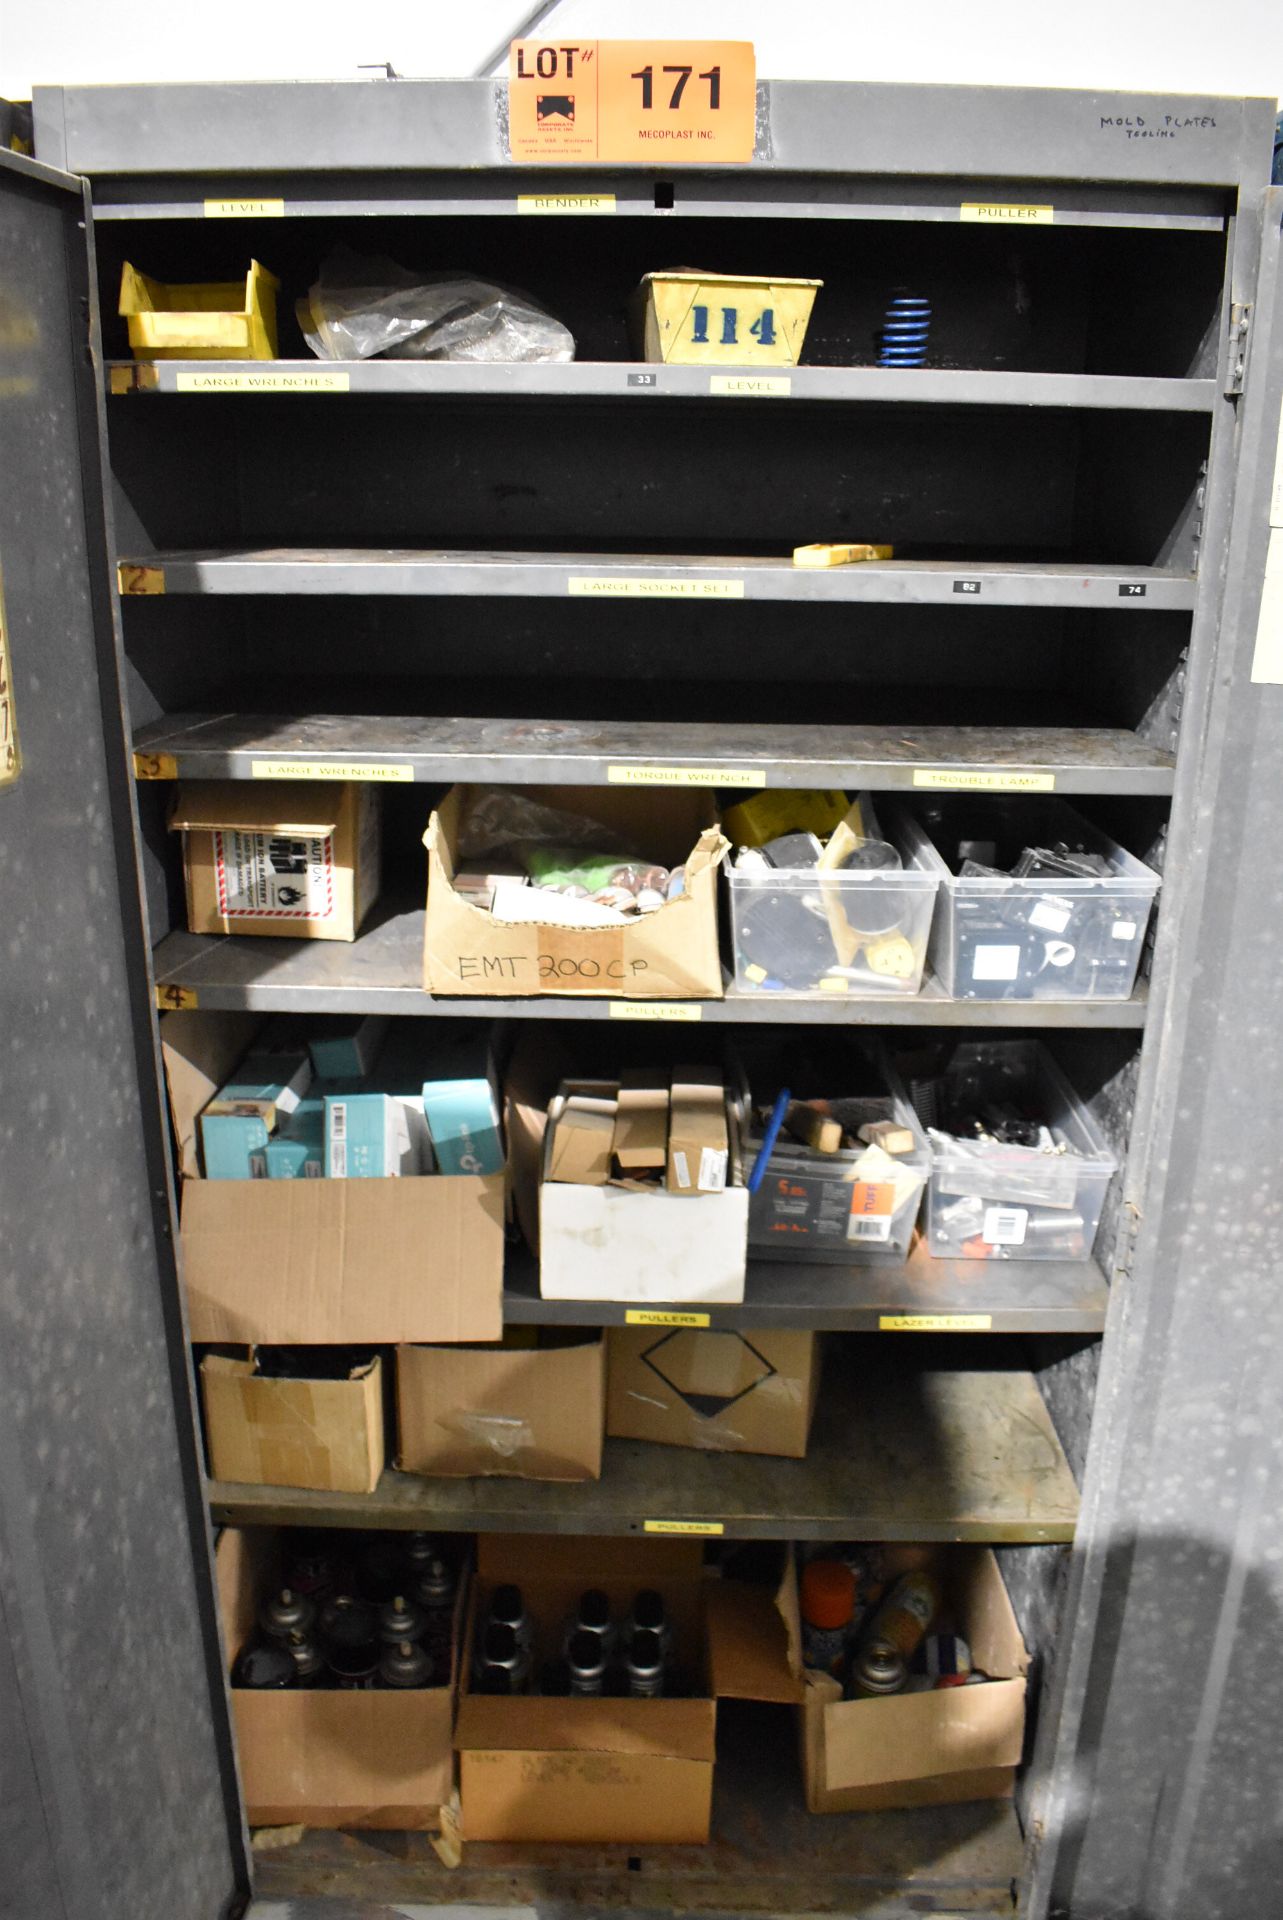 LOT/ 2-DOOR CABINET WITH CONTENTS CONSISTING OF SUPPLIES AND HARDWARE